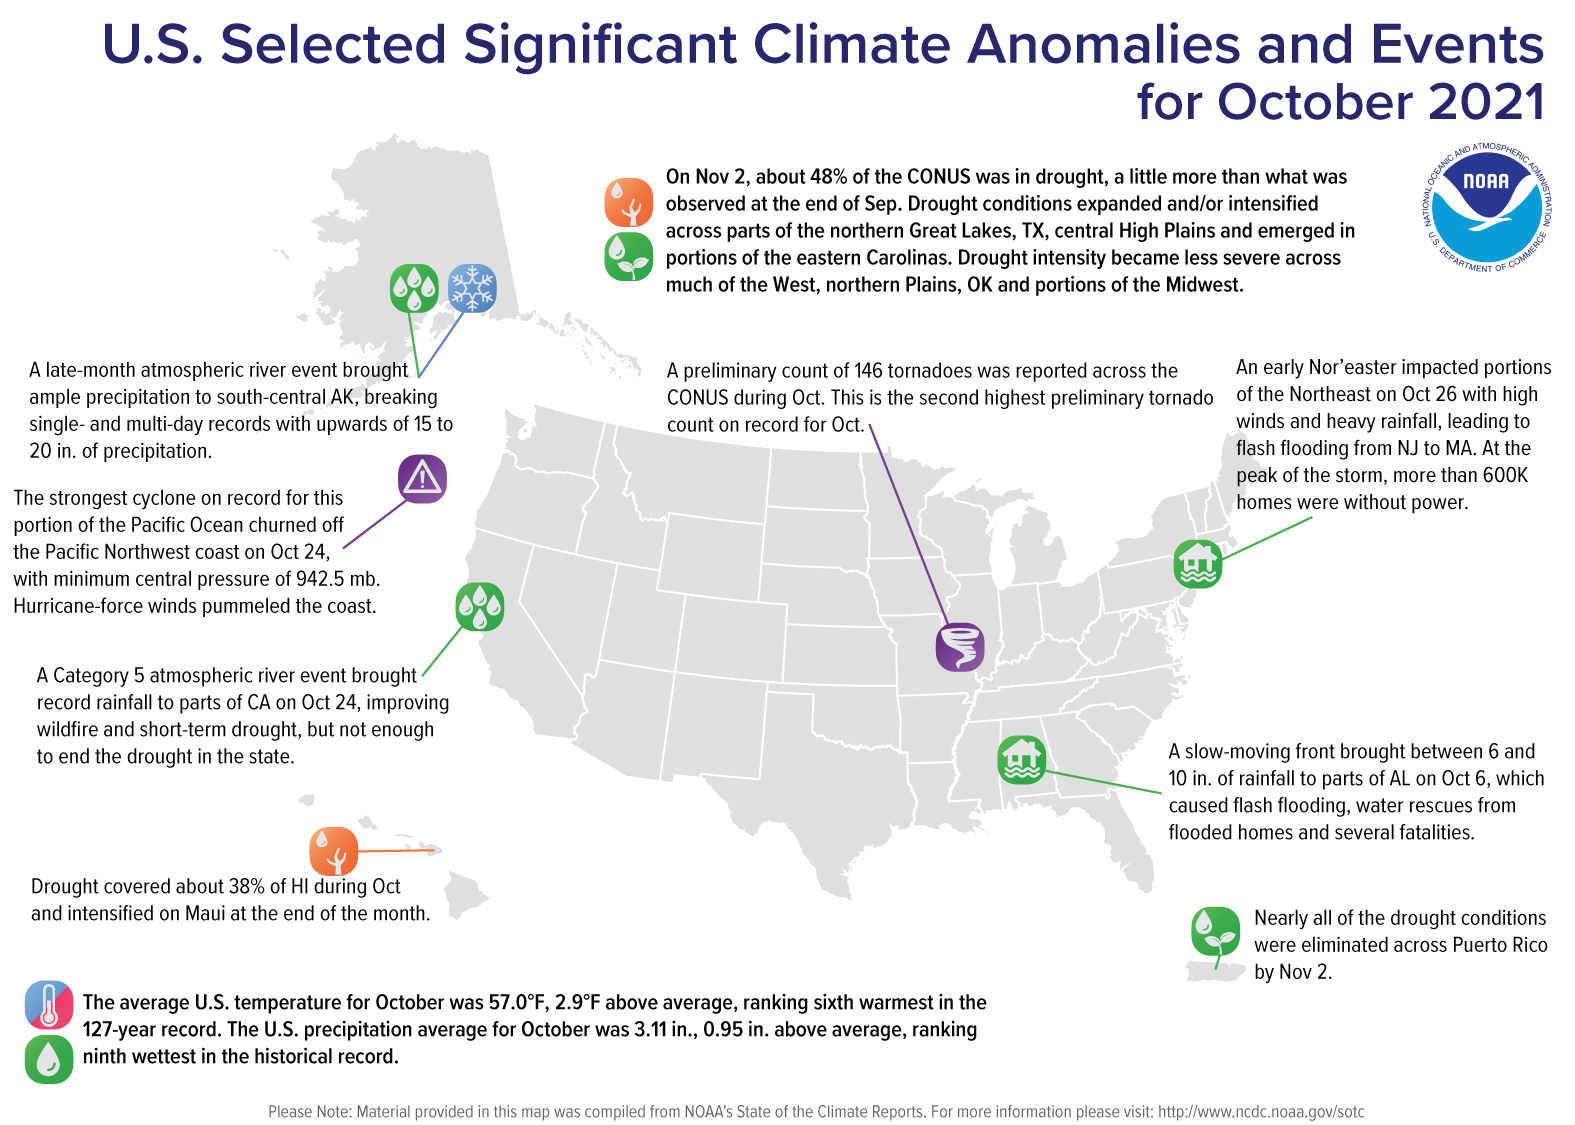 U.S map plotted with significant climate and weather events that occurred during October 2021.